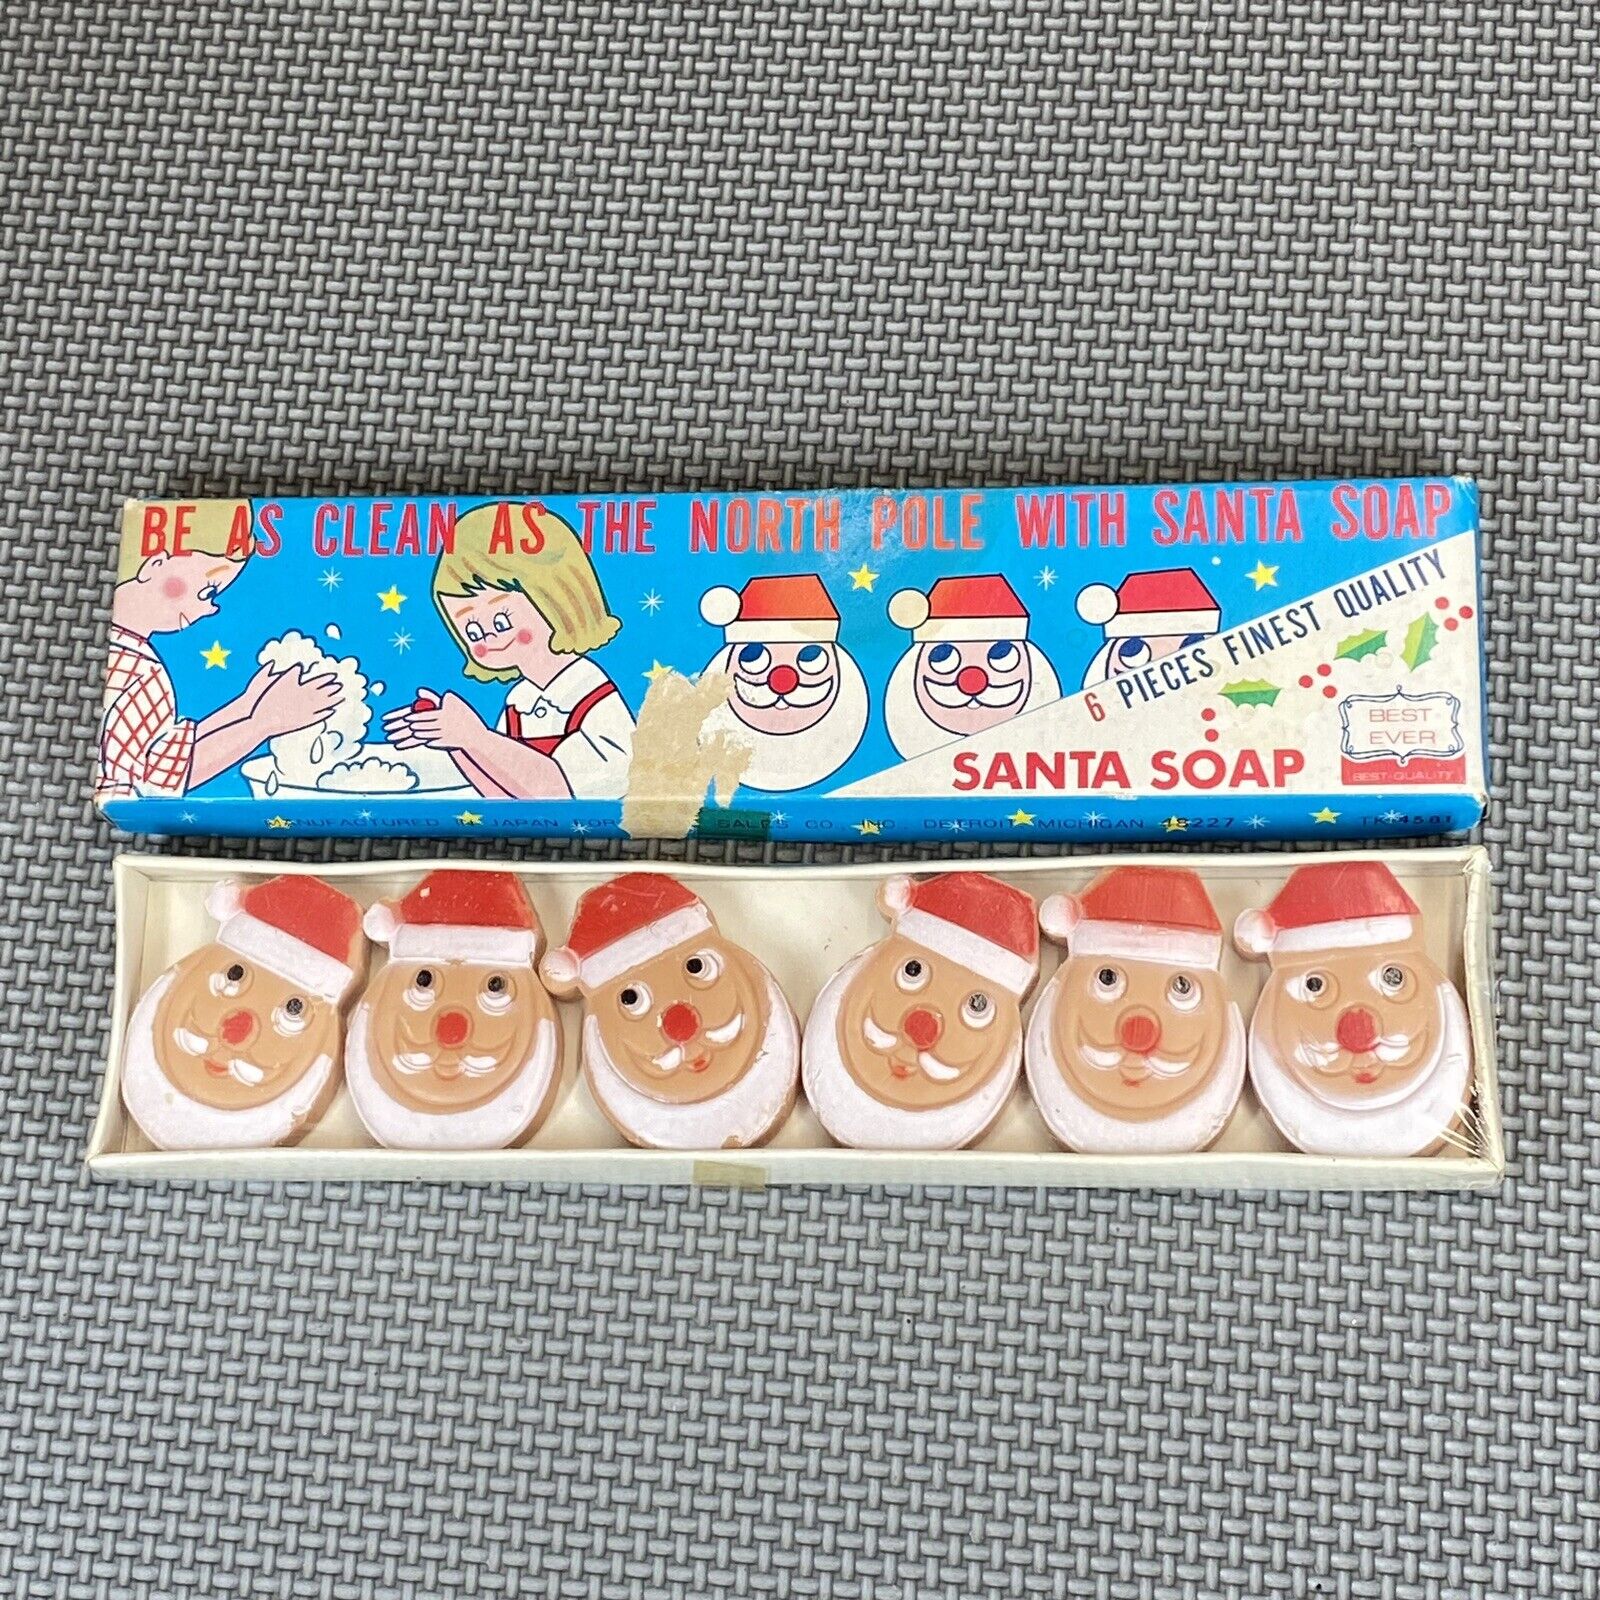 Vintage Christmas Best Ever Imports 6 Pack Santa Clause Mini Soaps Japan New Box